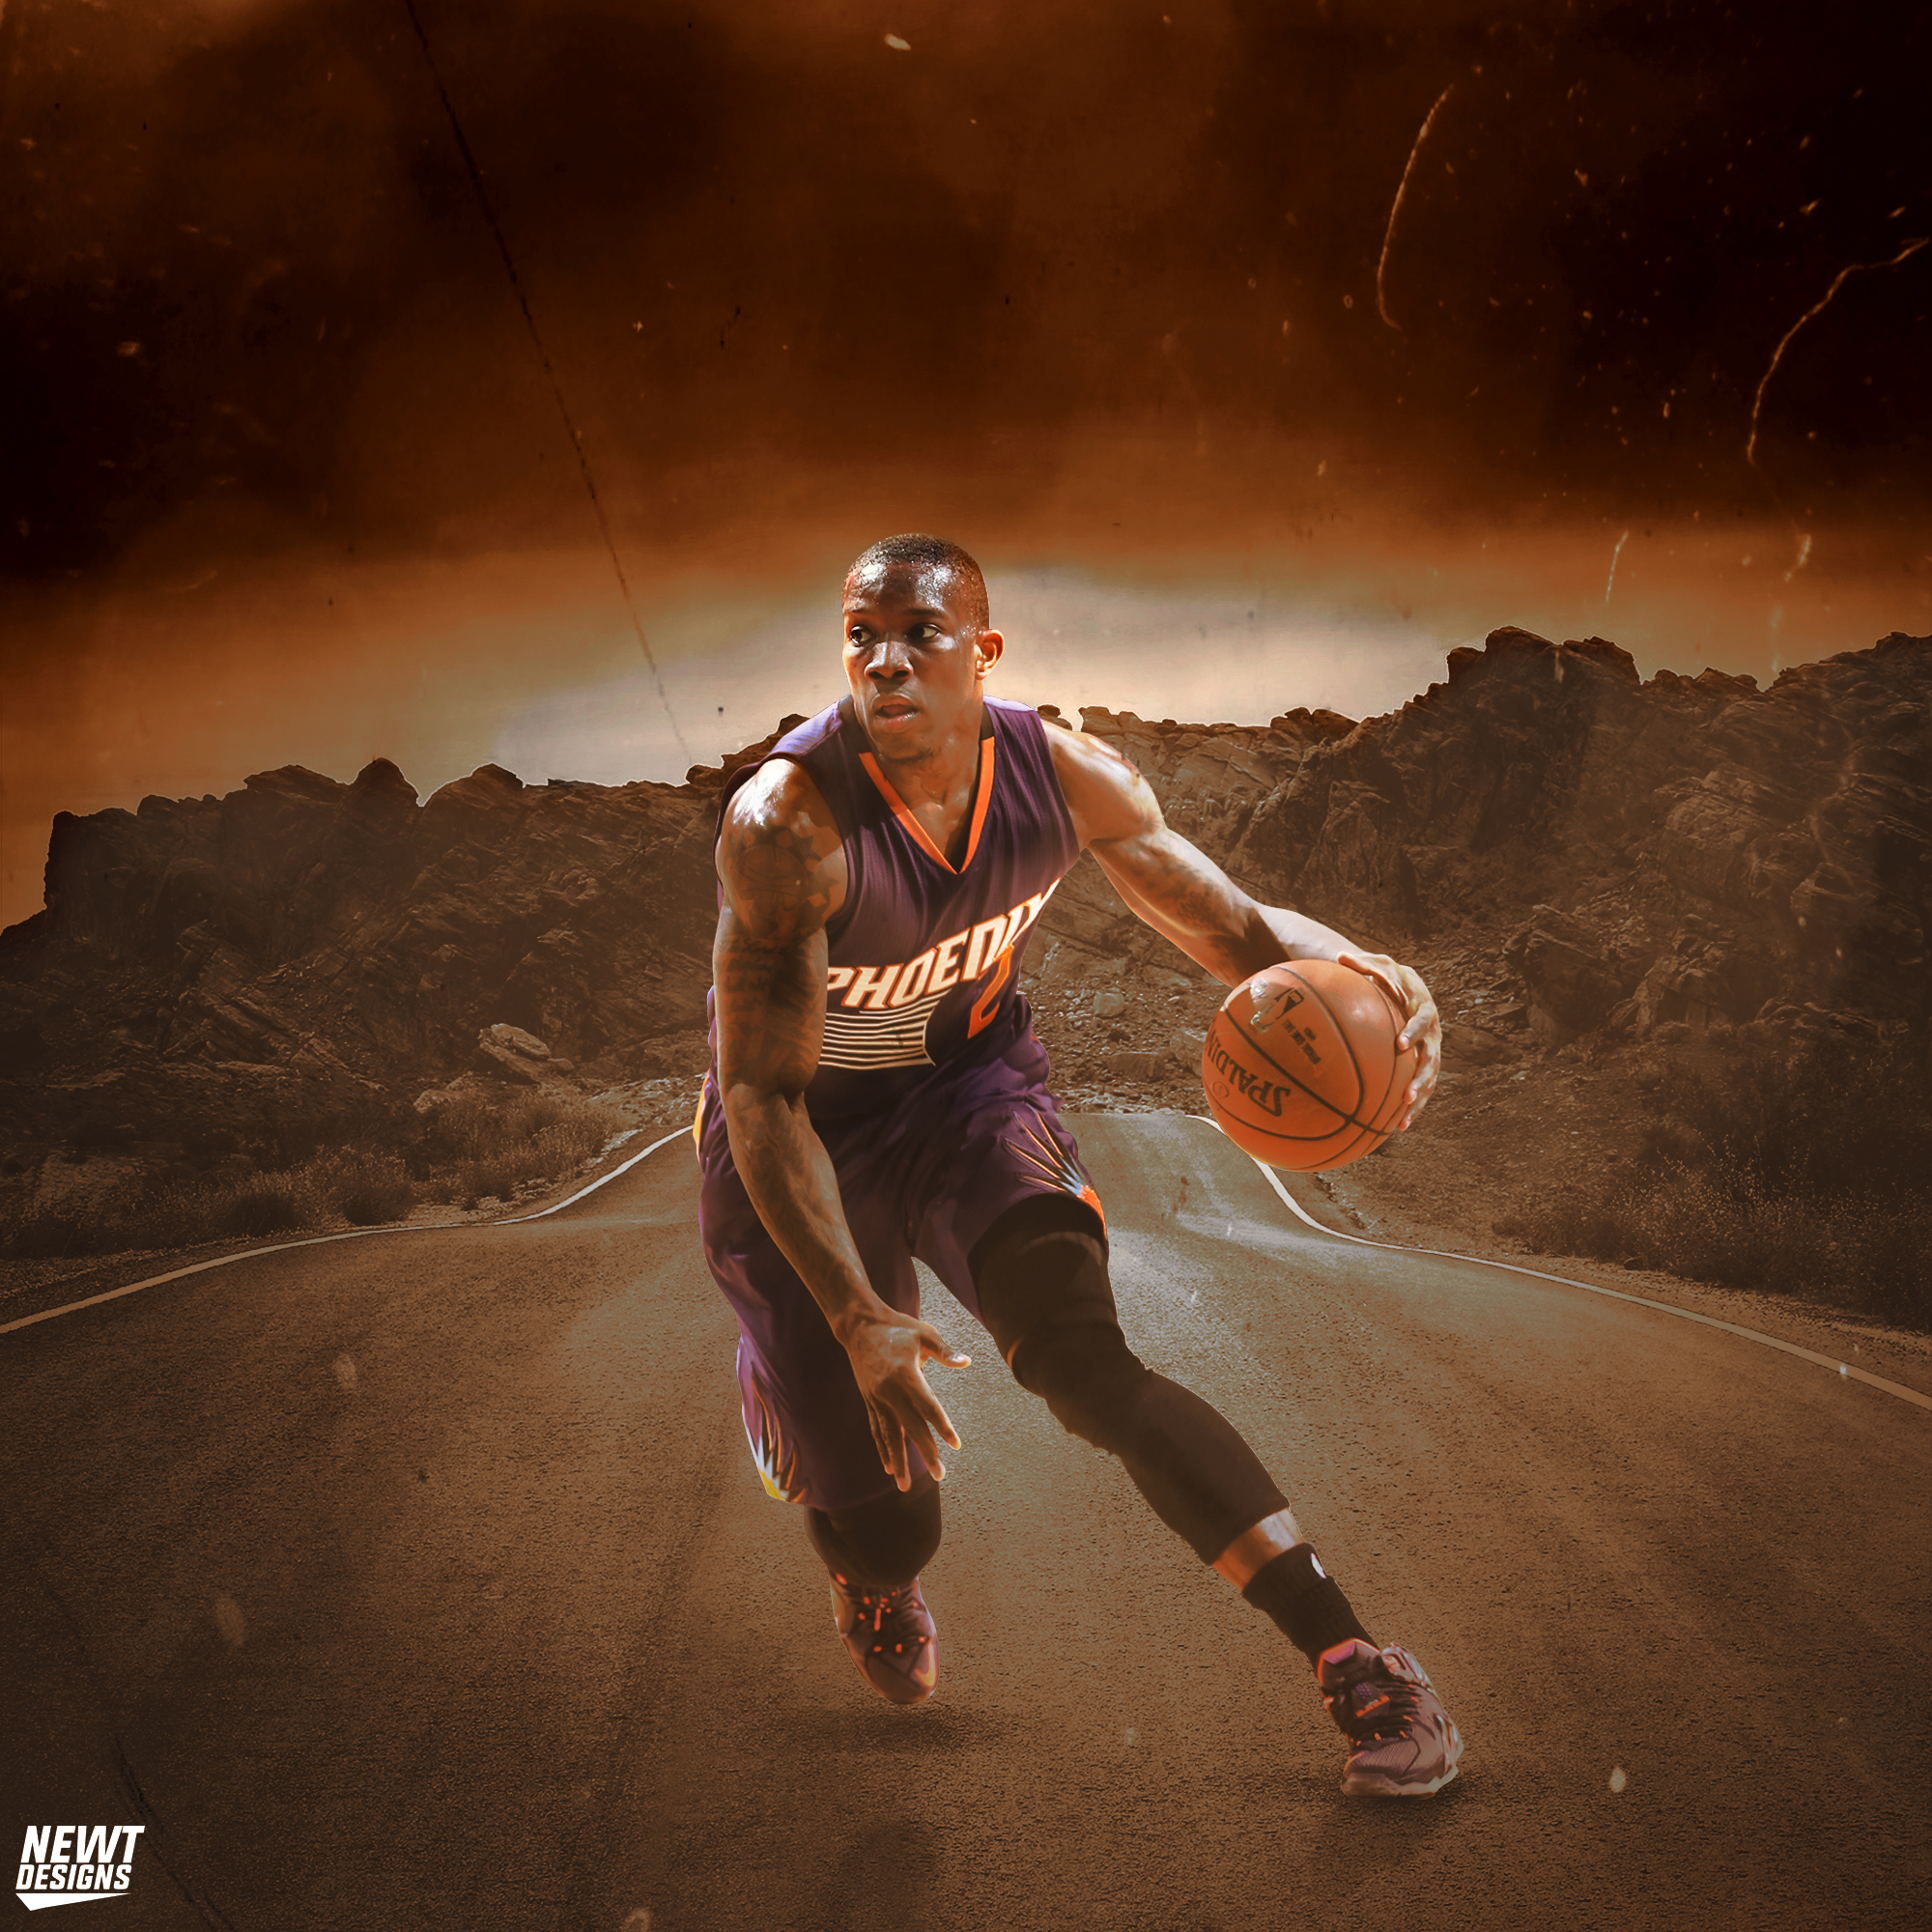 Eric Bledsoe Wallpapers